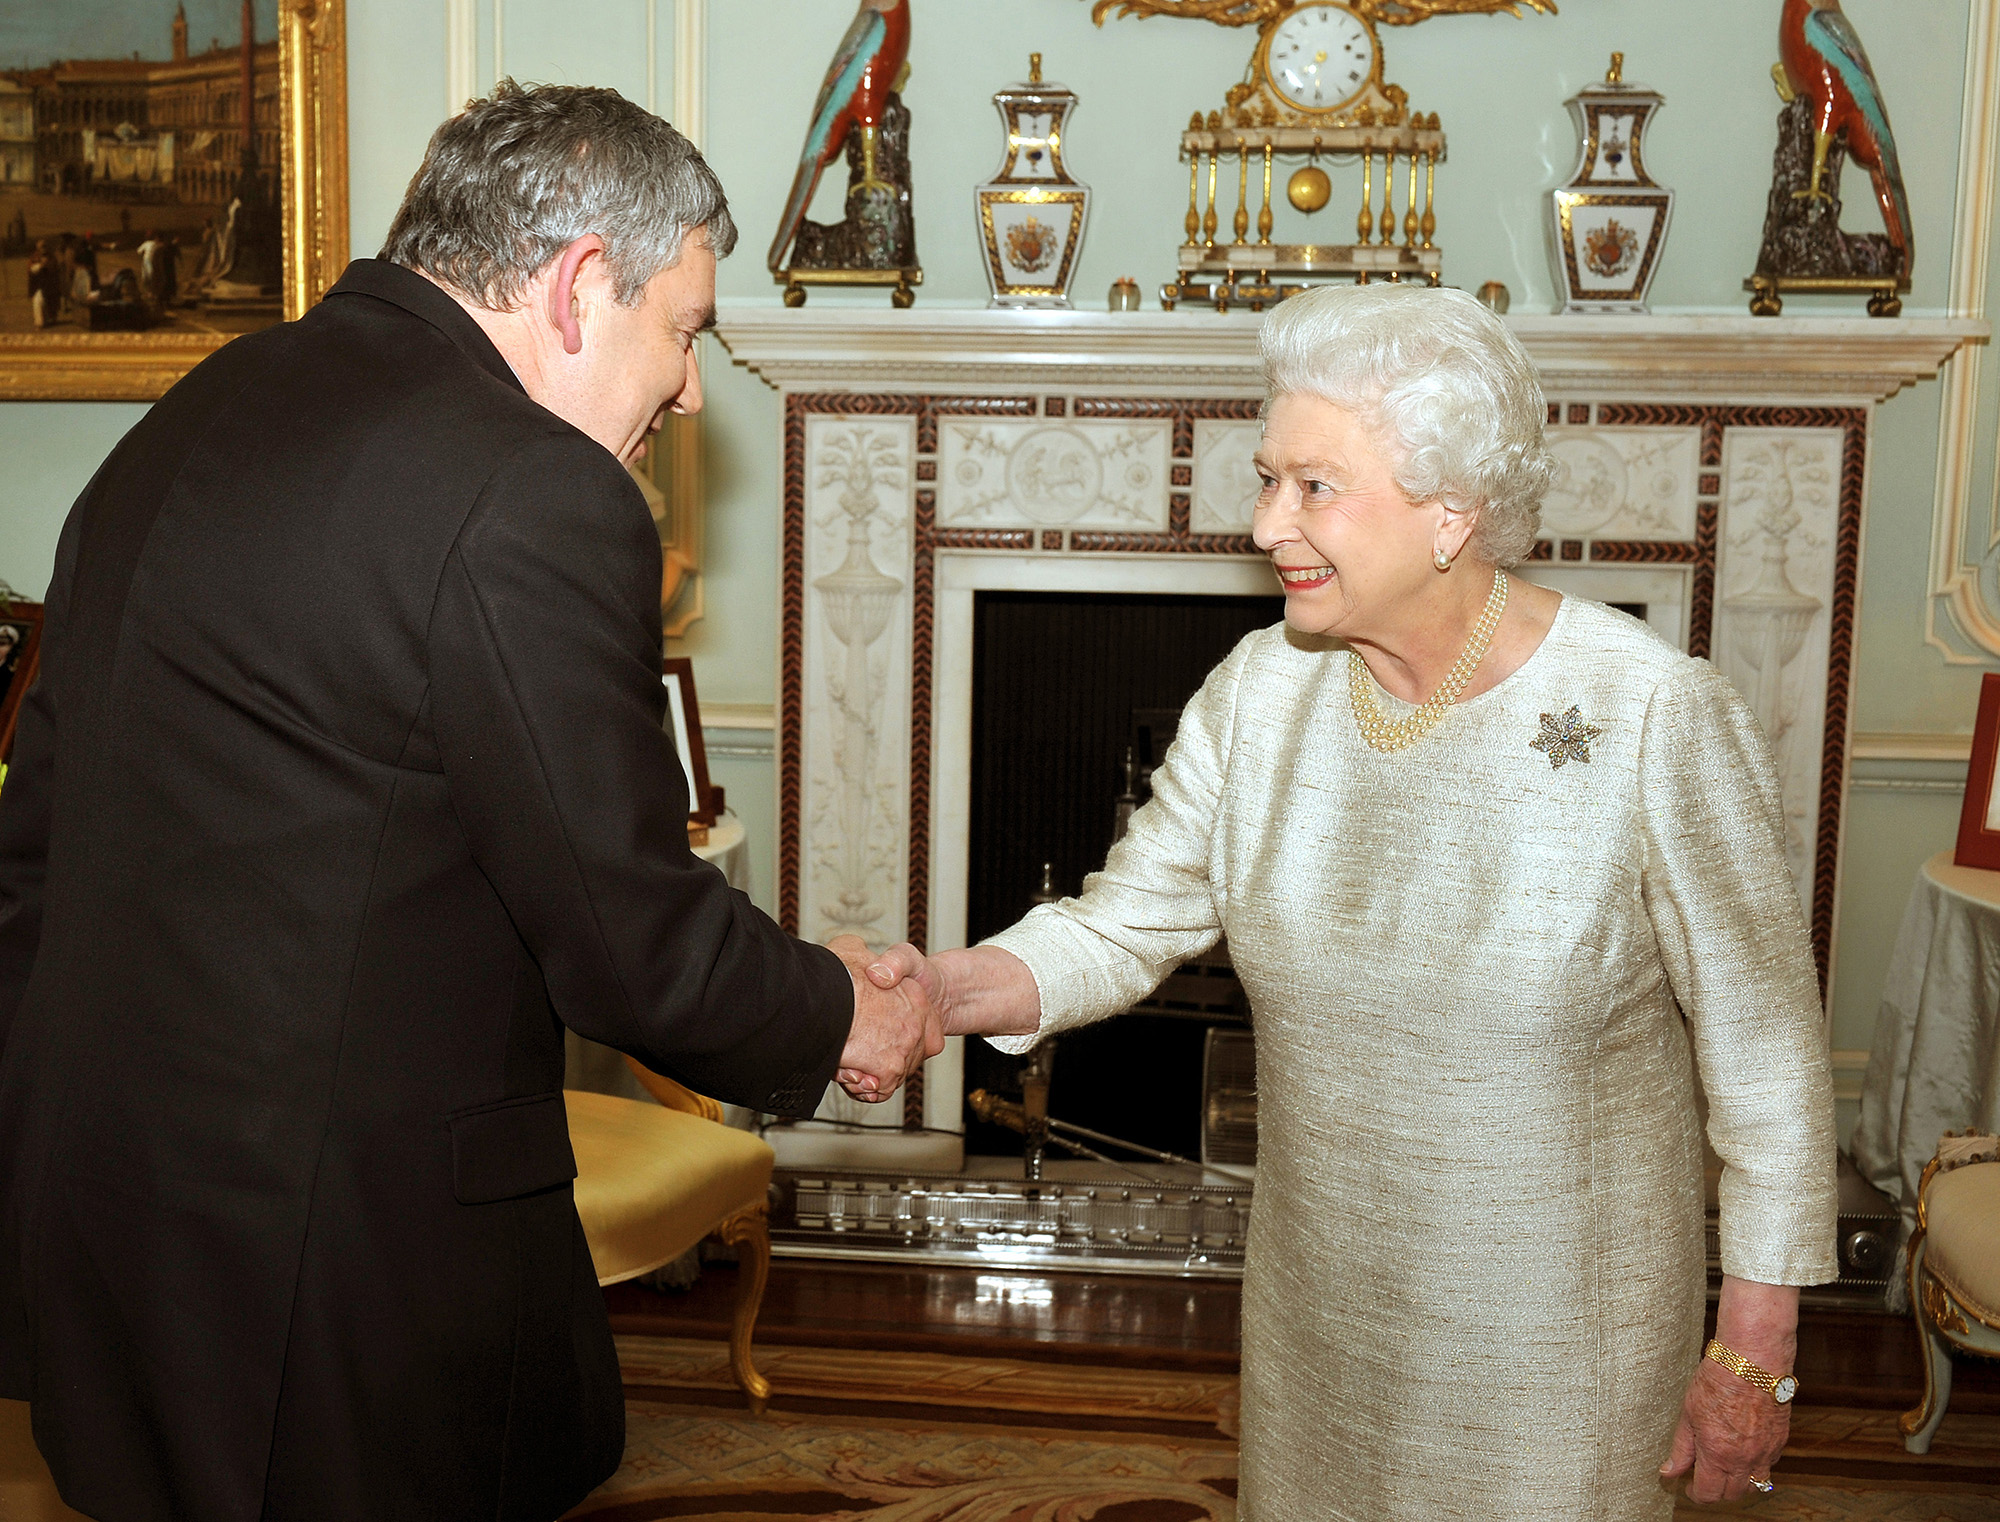 Britain's outgoing Prime Minister Gordon Brown is greeted by Queen Elizabeth in a meeting in which he tendered his resignation at Buckingham Palace in London, England, on May 11, 2010.